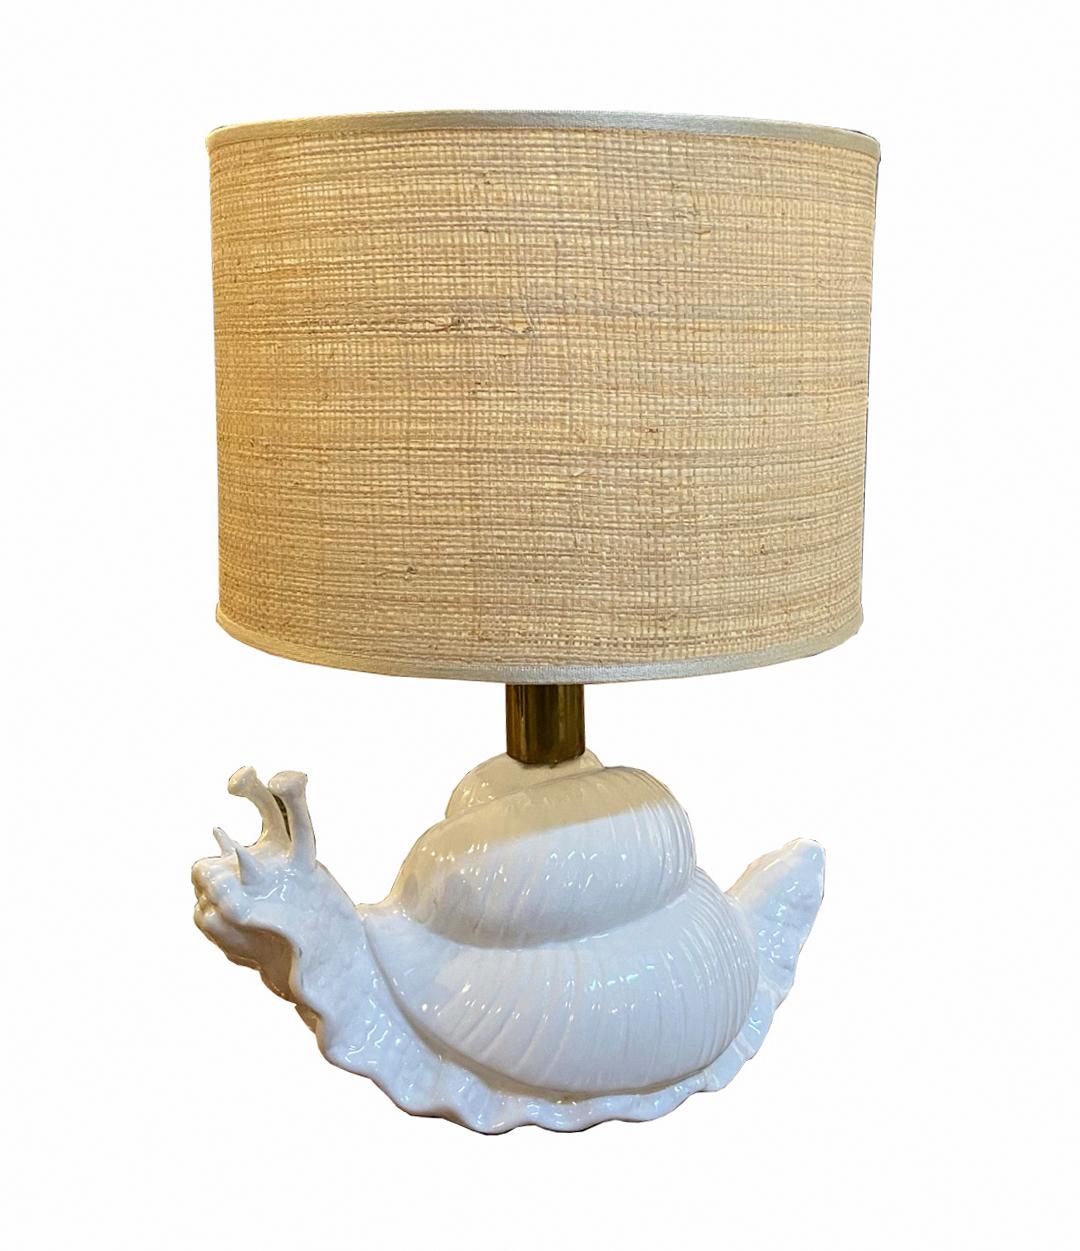 White ceramic table lamp, brass and natural raffia dome circa 1960. The snail sculpture has a grace and charm of extraordinary beauty.